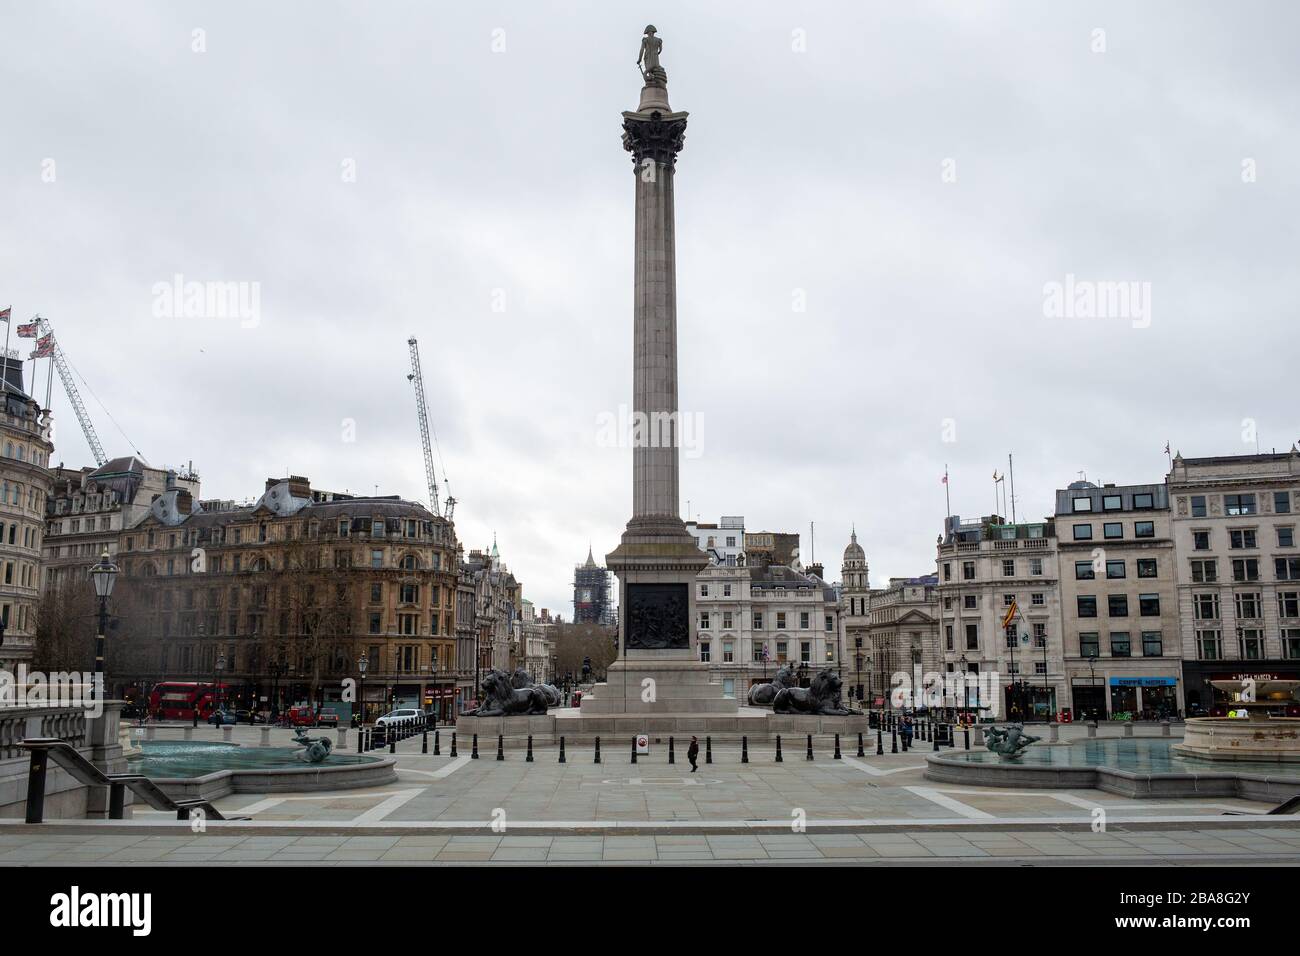 Some parts of central London are being left unusually quiet at times as consideration is given to social distancing during the COVID-19 pandemic. This Stock Photo